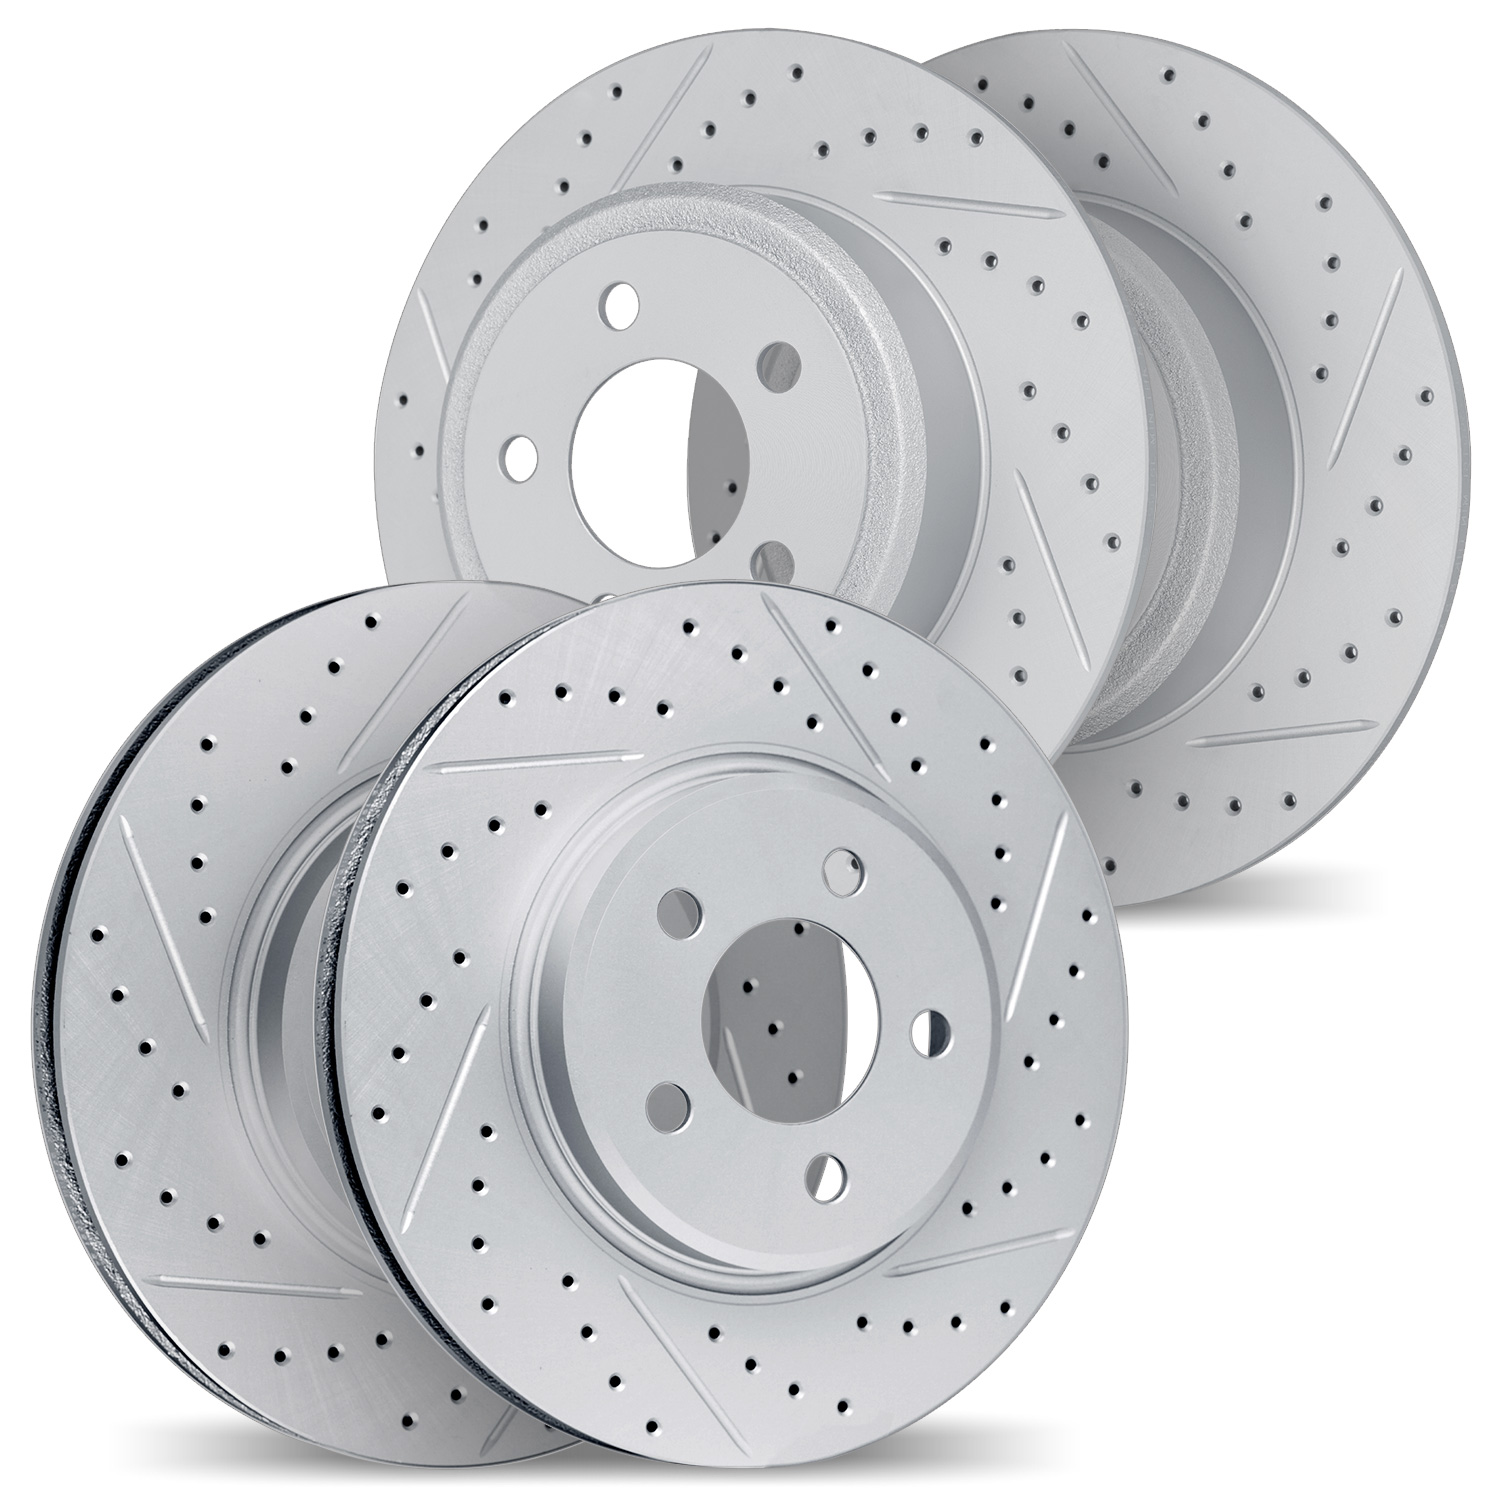 2004-13005 Geoperformance Drilled/Slotted Brake Rotors, 2001-2006 Subaru, Position: Front and Rear